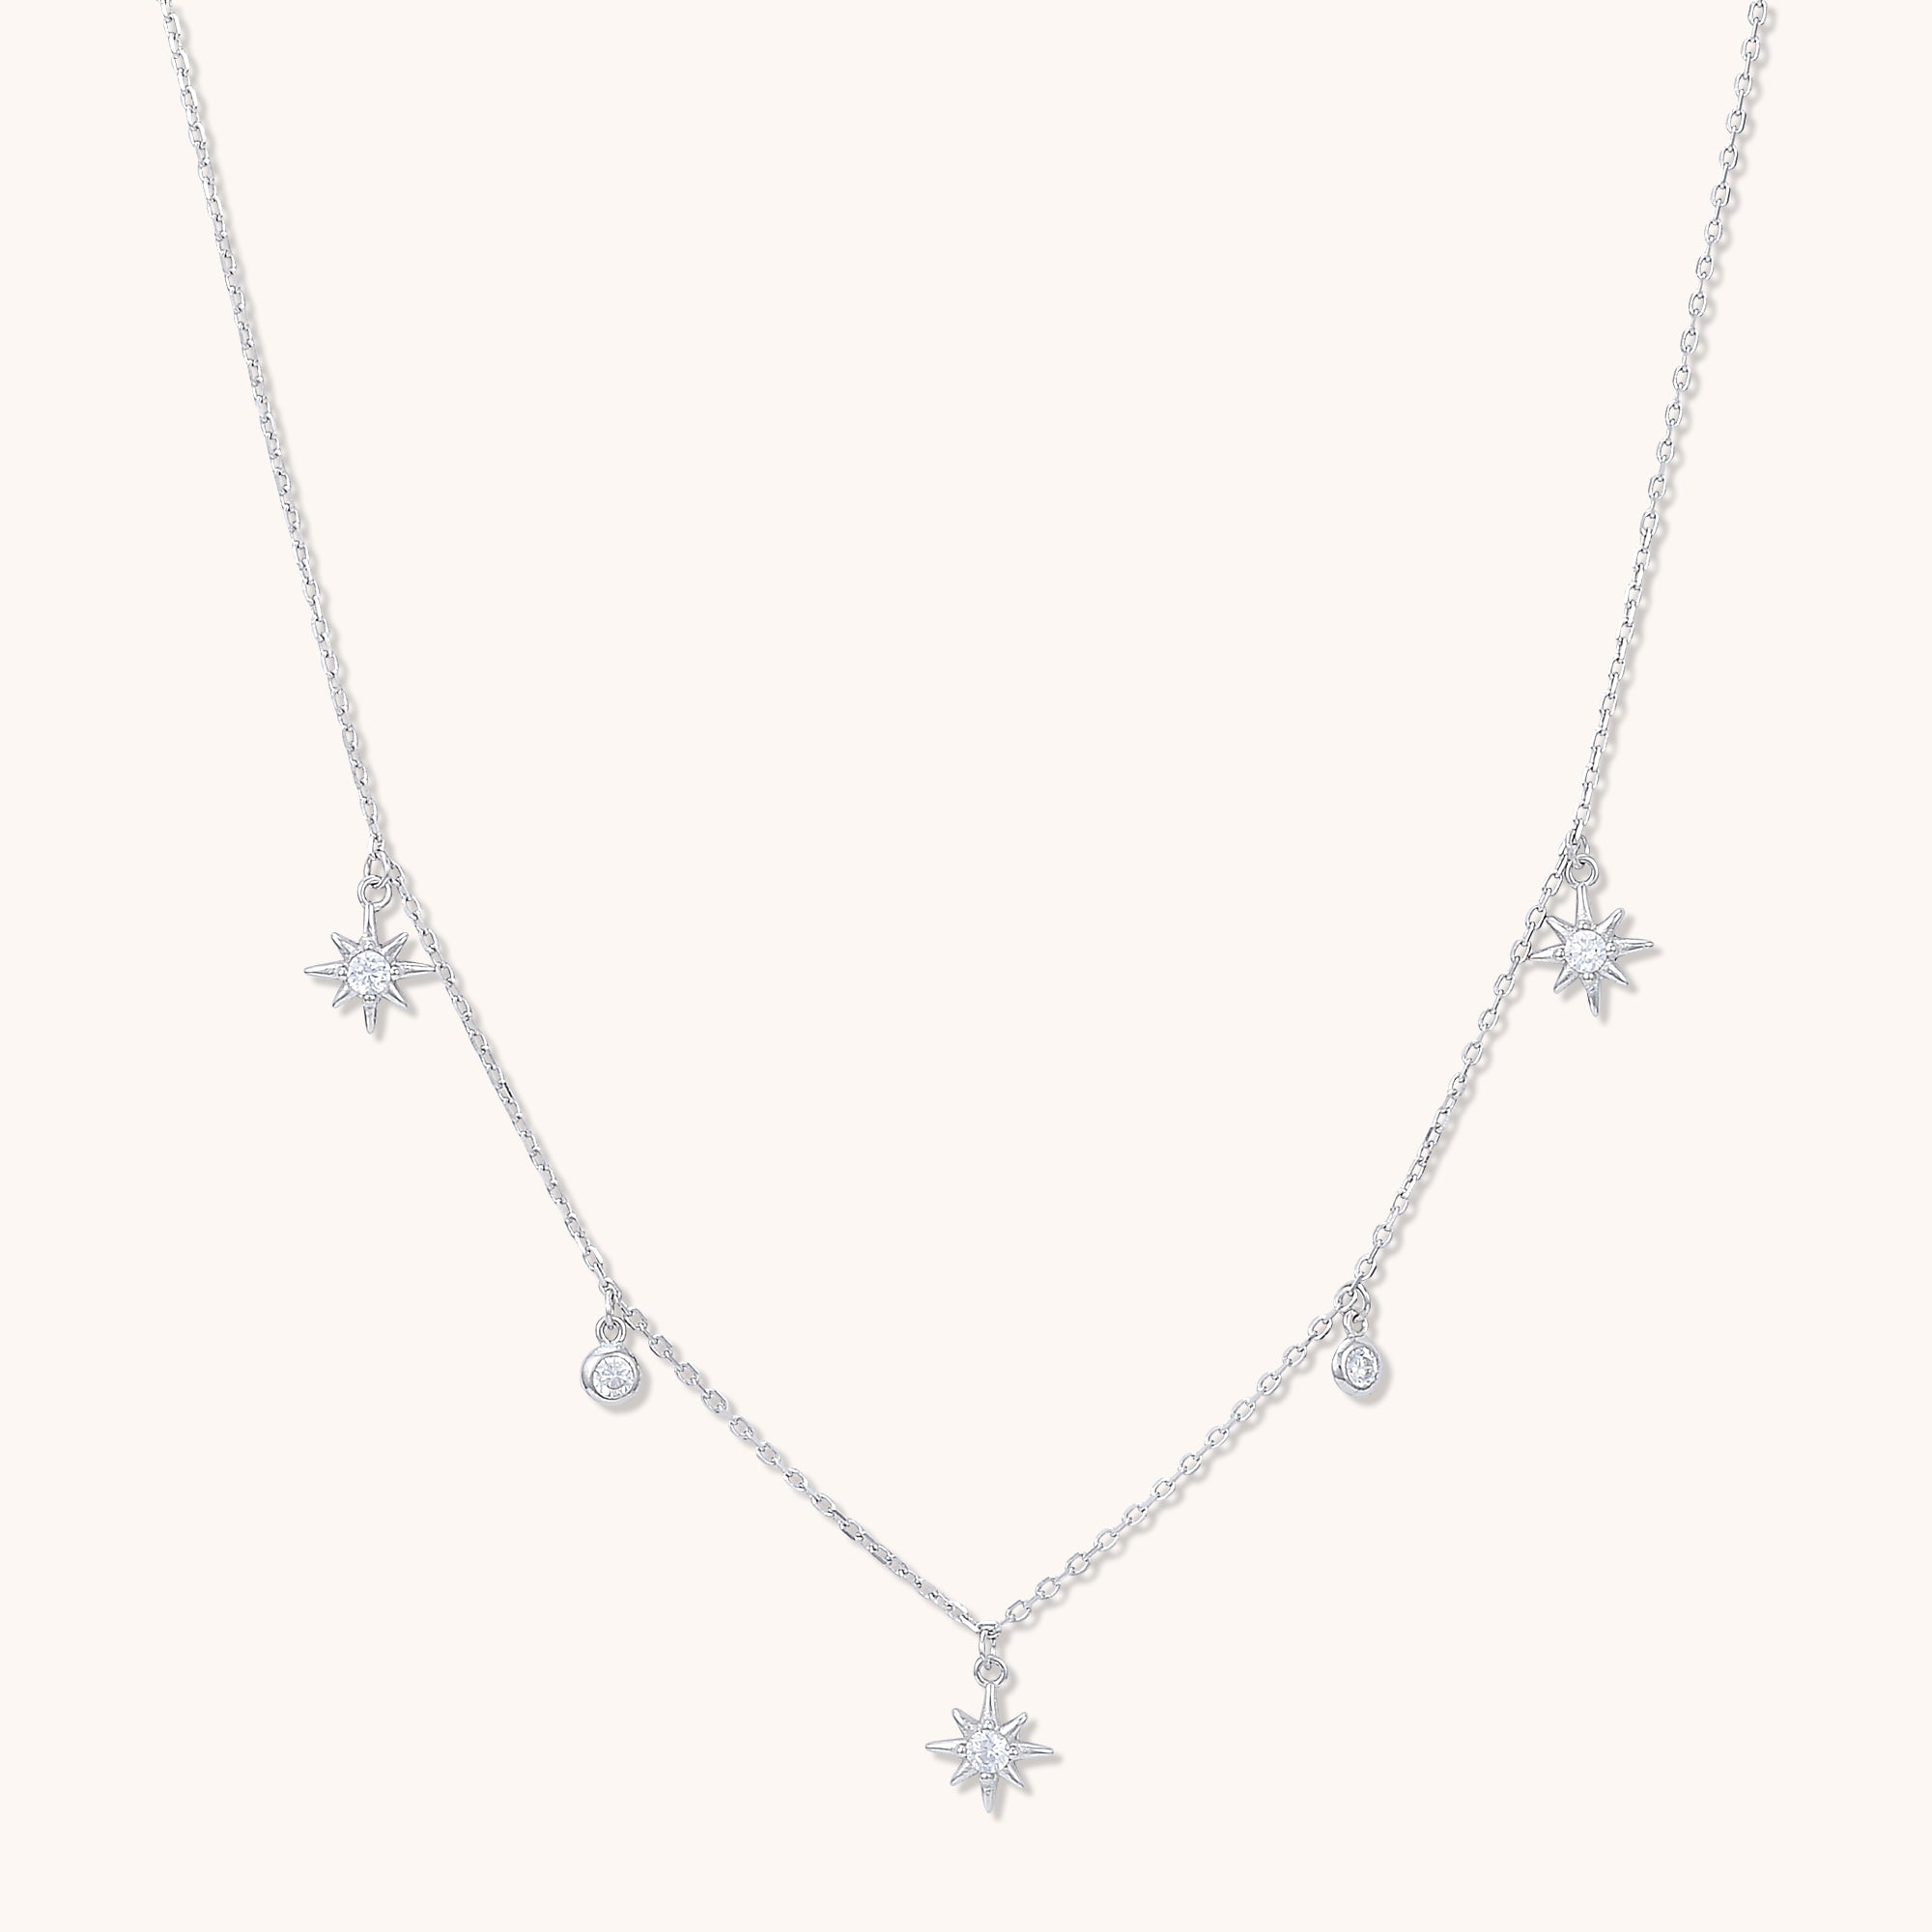 North Star Dangling Necklace Silver